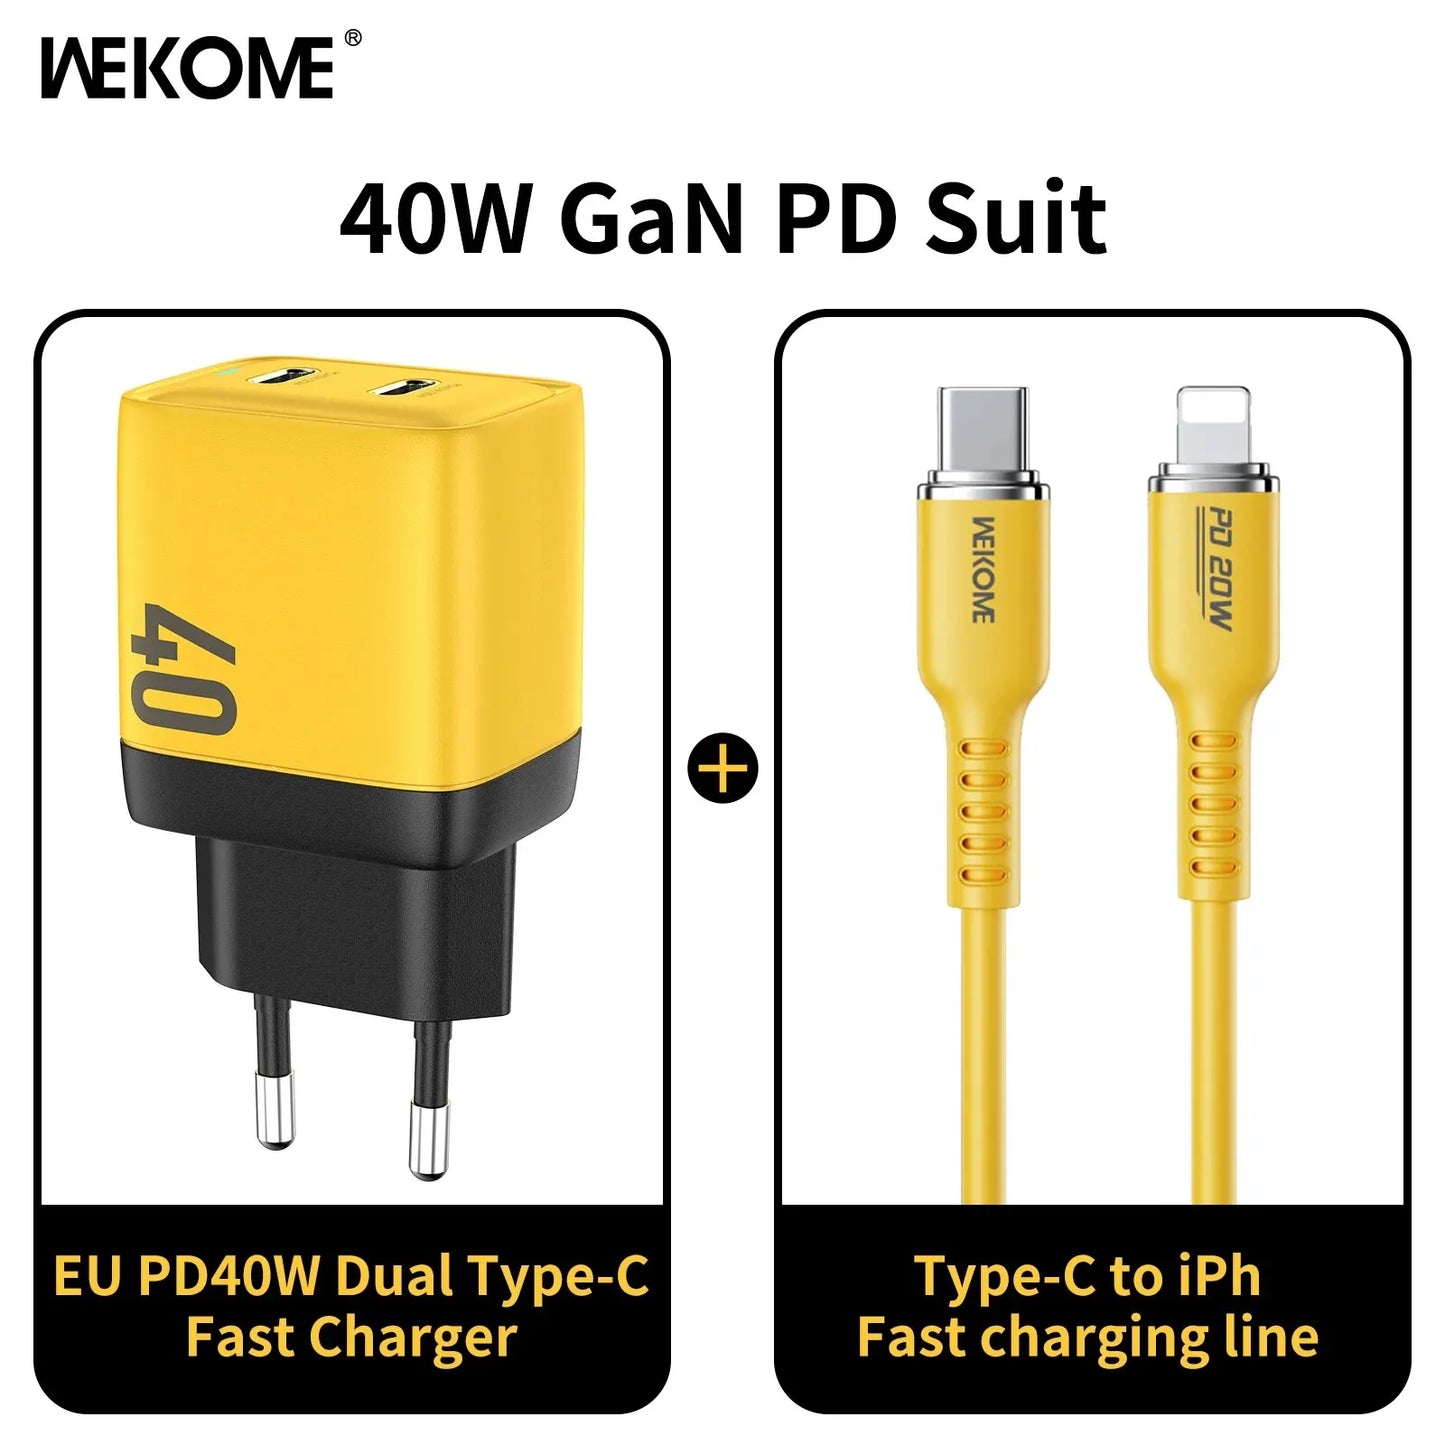 WEKOME GaN 40W/67W/100W Type C Charger Portable USB Charger Adapter QC4.0 PD PPS Fast Charging for iPhone Samsung Xiaomi Macbook EU charger PD Cable Yellow